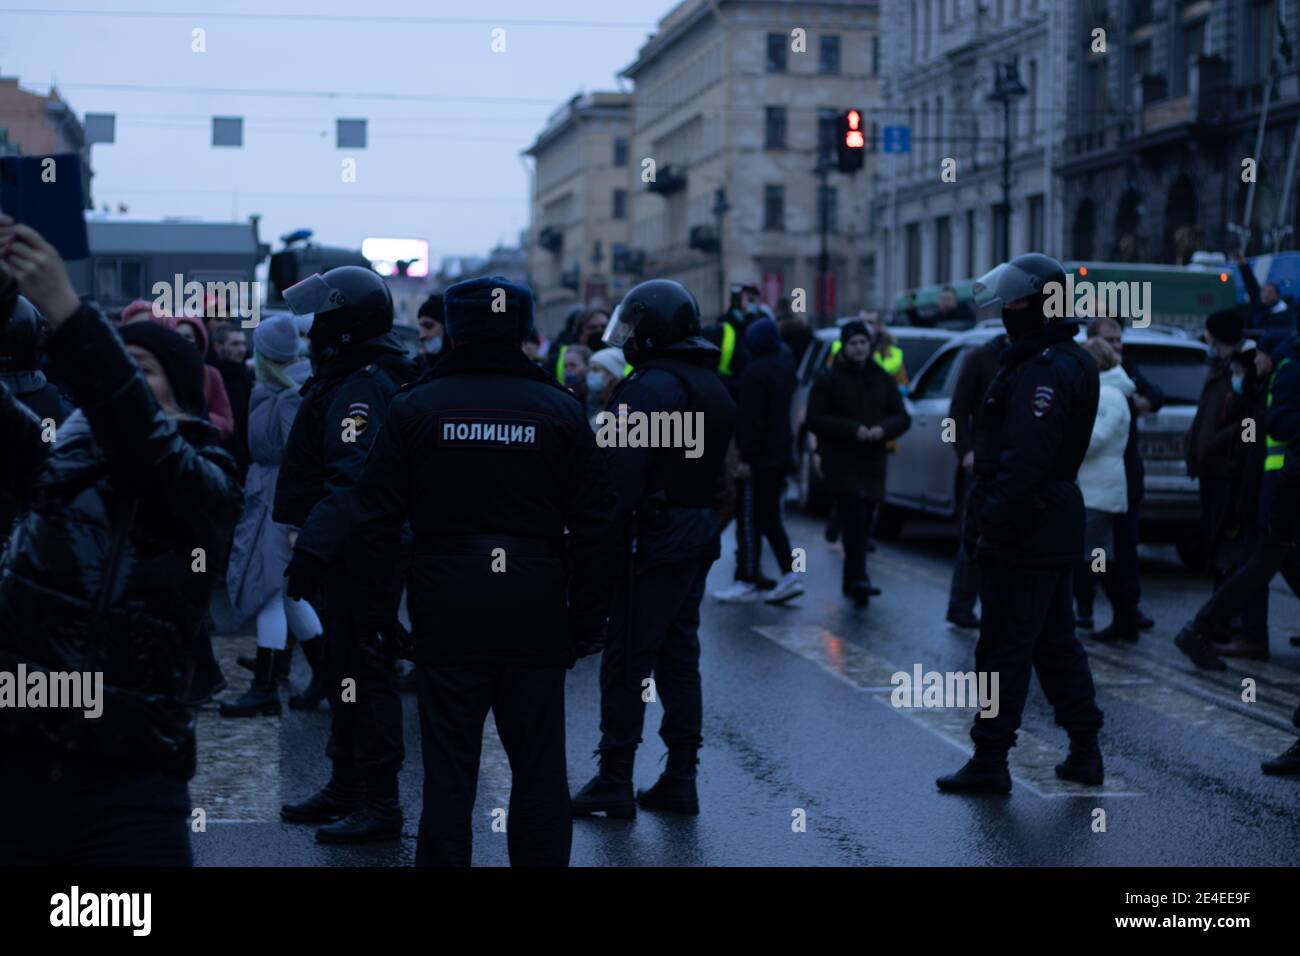 Saint Petersburg, Russia - 23 January 2021: Protest marching in Russia. Police and people on street. Demonstrators crowd , Illustrative Editorial. Stock Photo